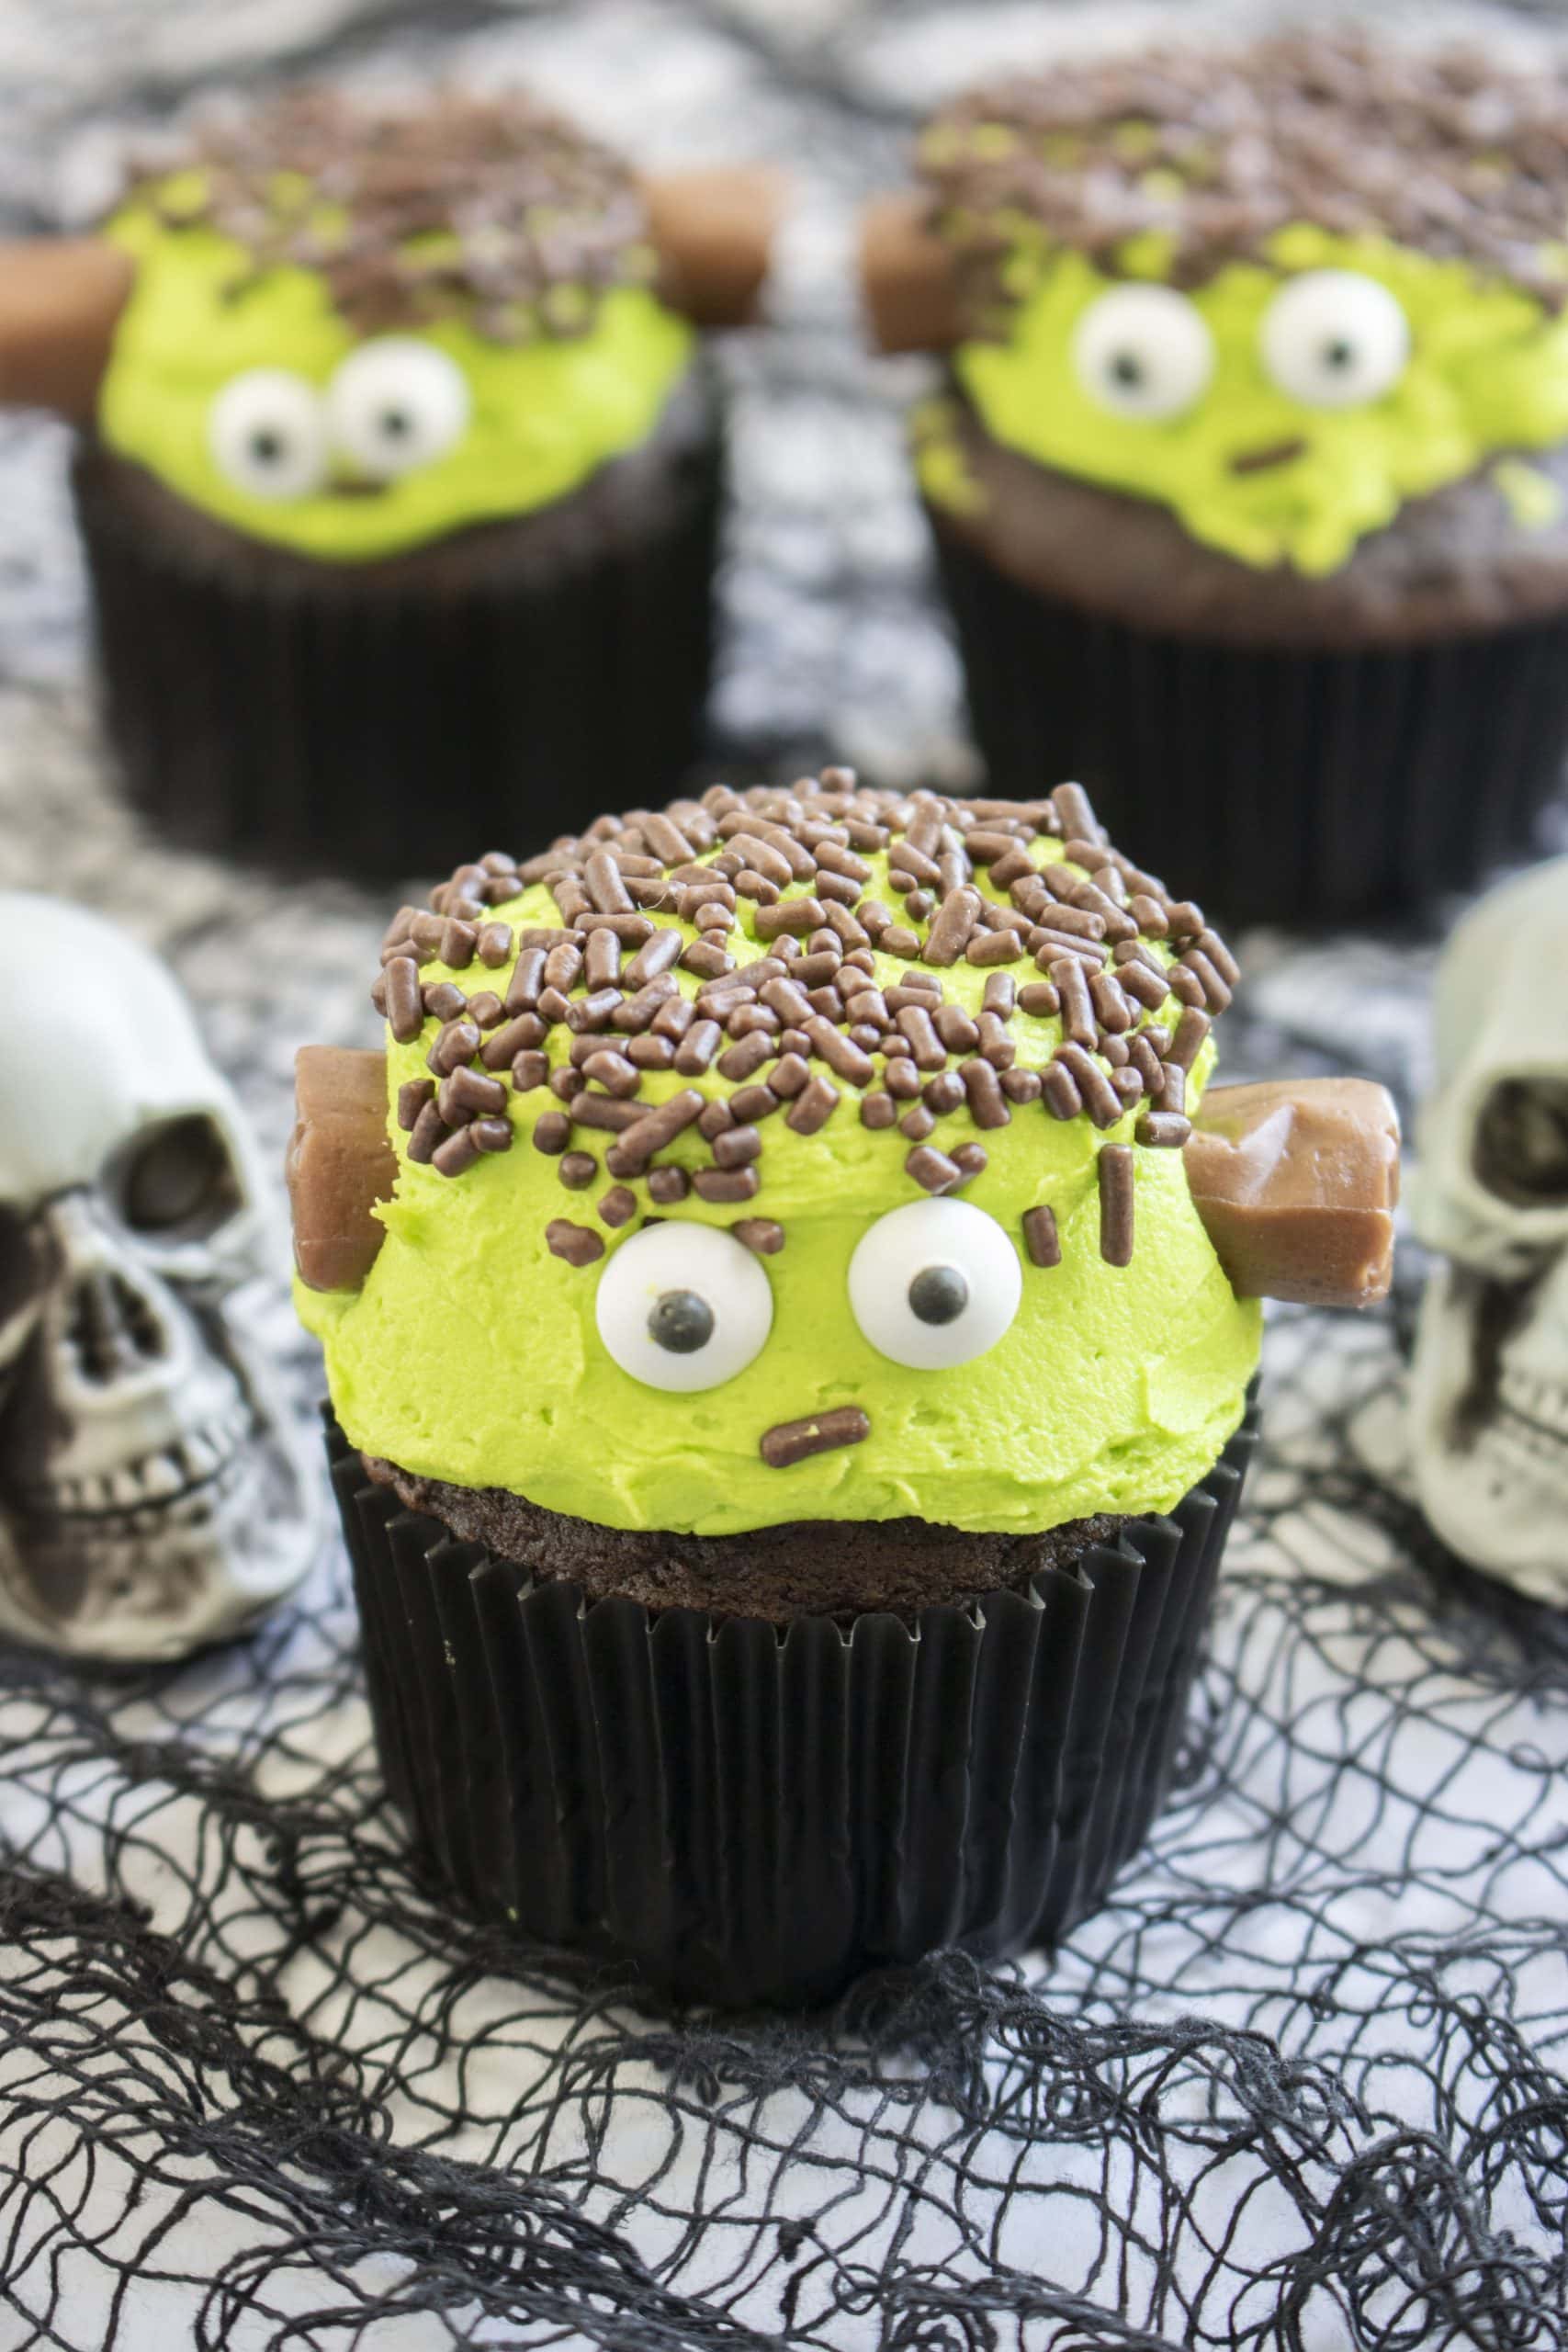 Spooky monster cupcakes.